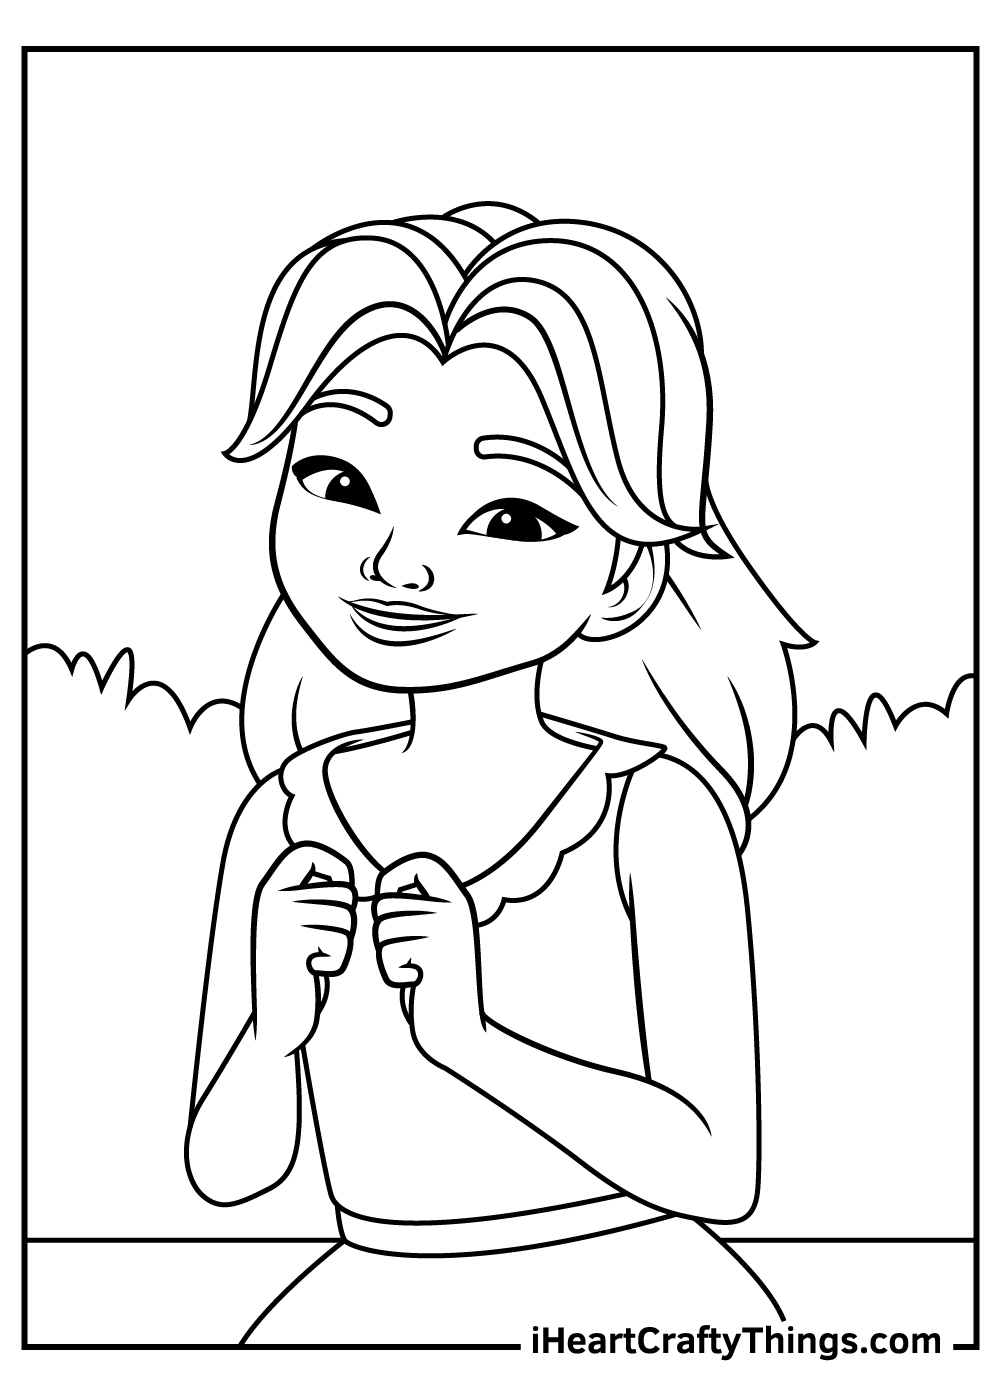 Lego friends coloring pages free printables